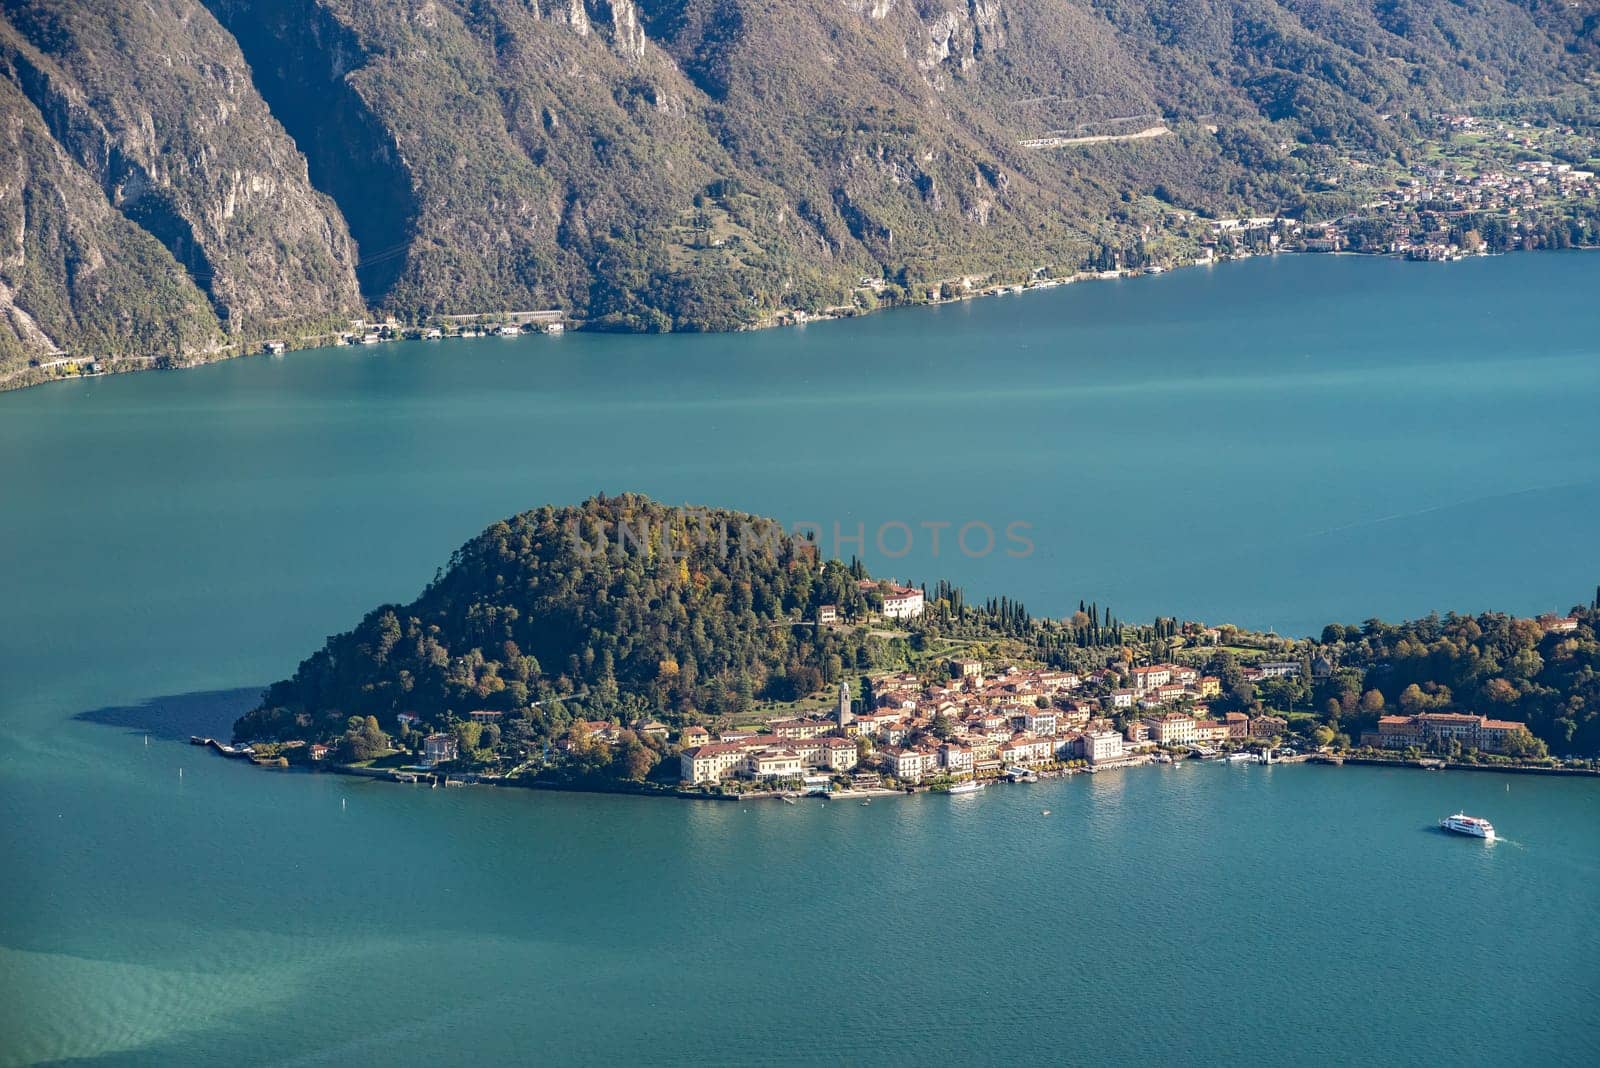 Magnificent view of Bellagio at lake Como seen from Monte Crocione, Italy